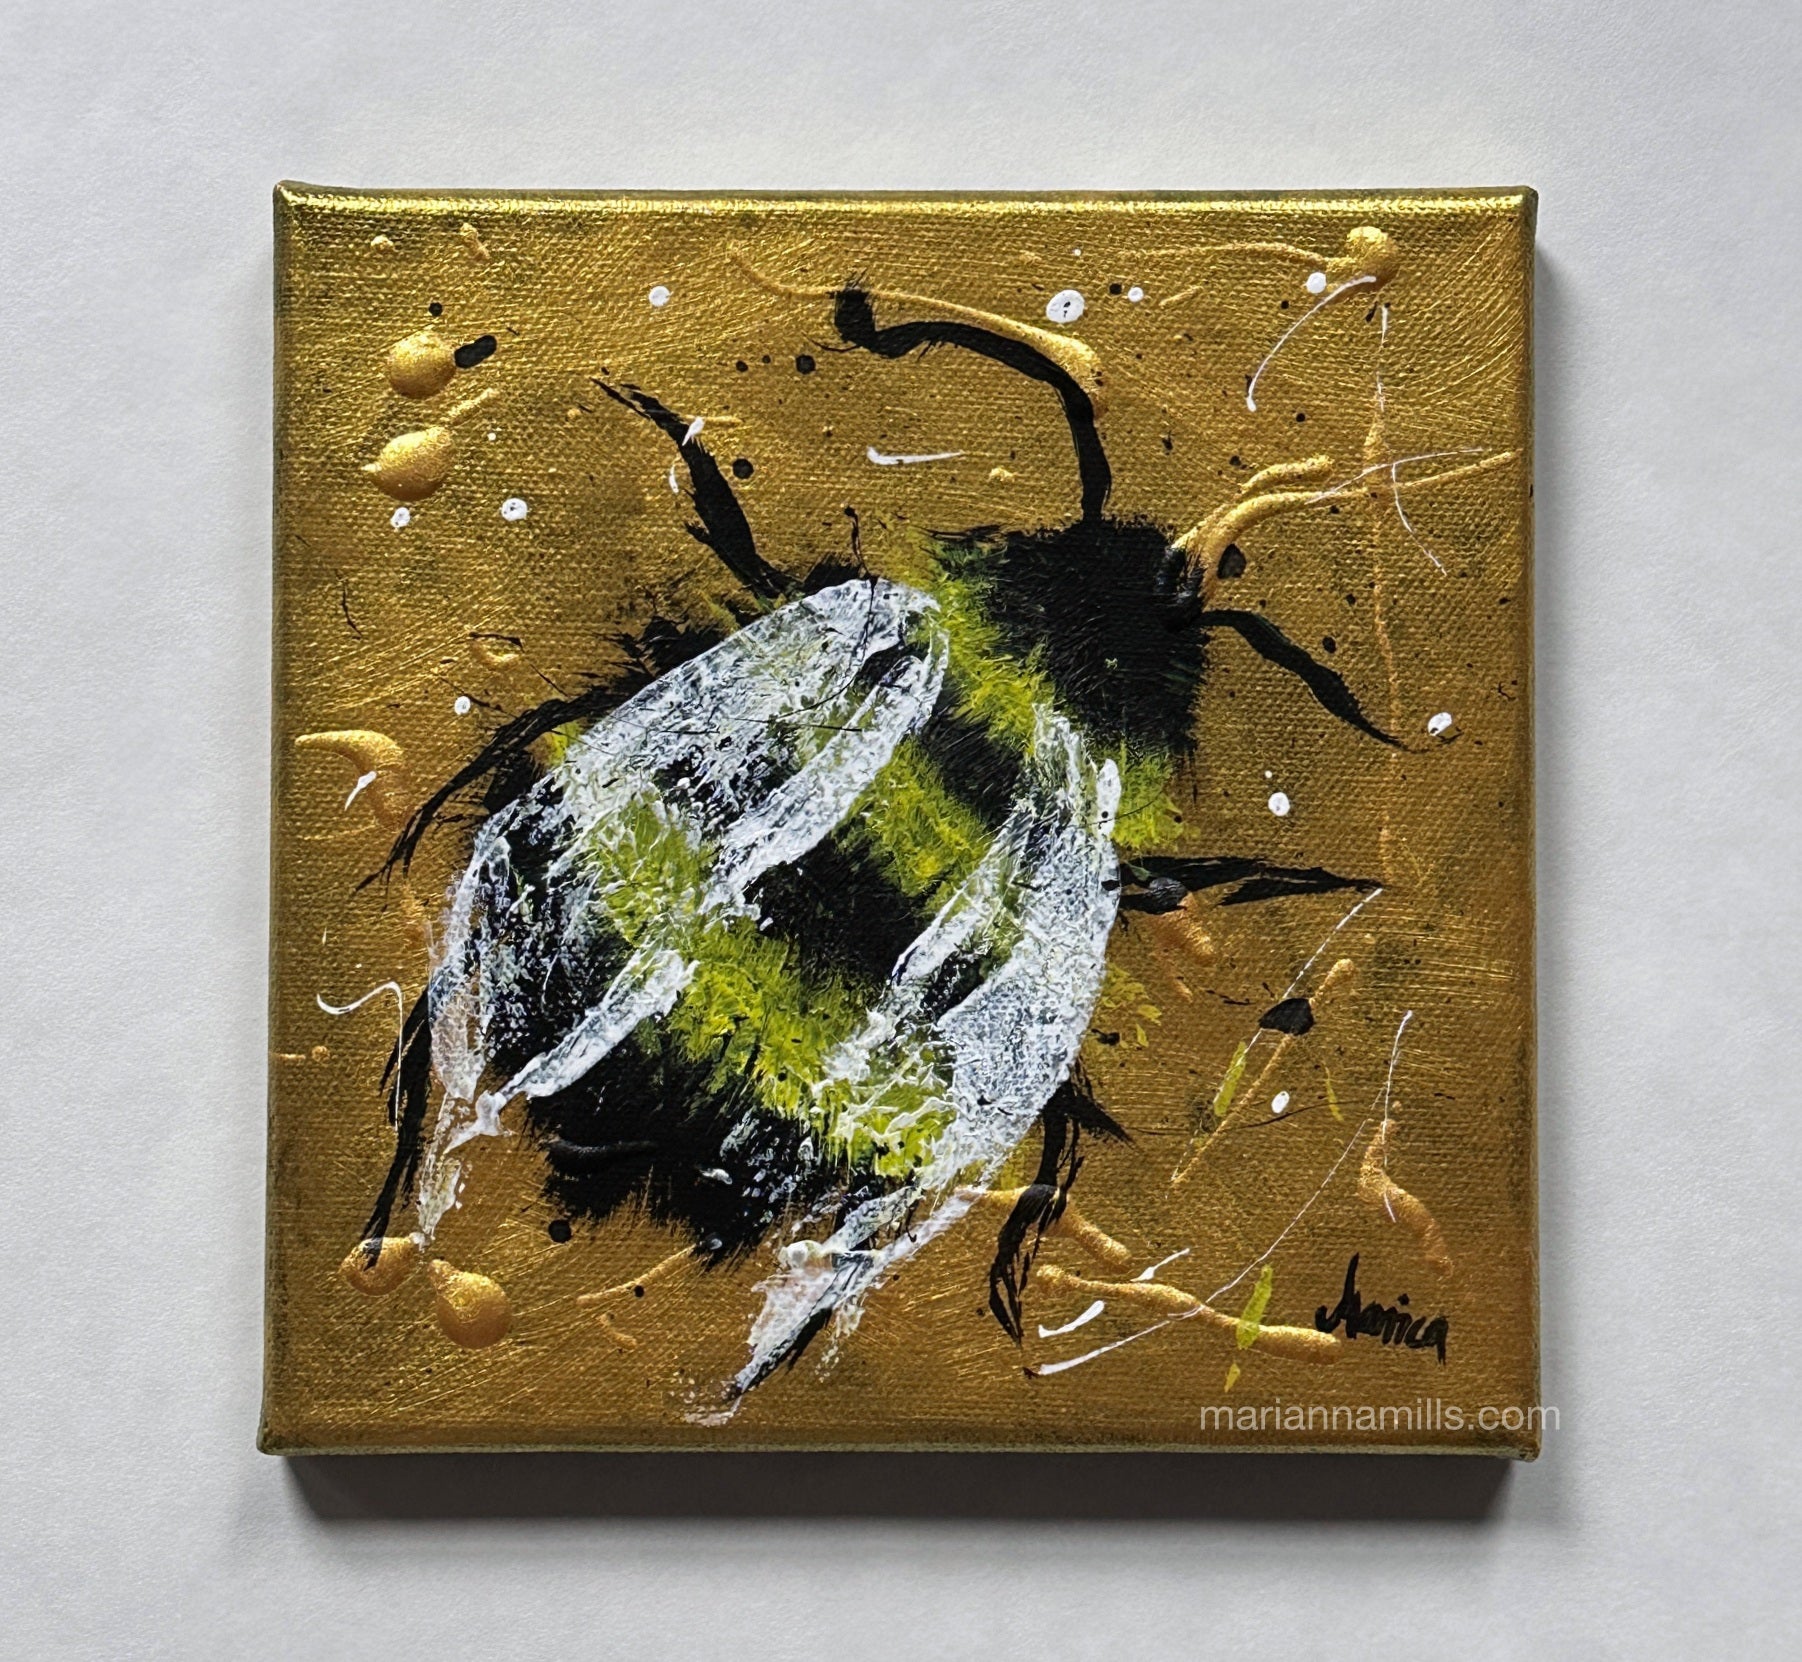 Bea the Bee, original textured painting by Marianna Mills